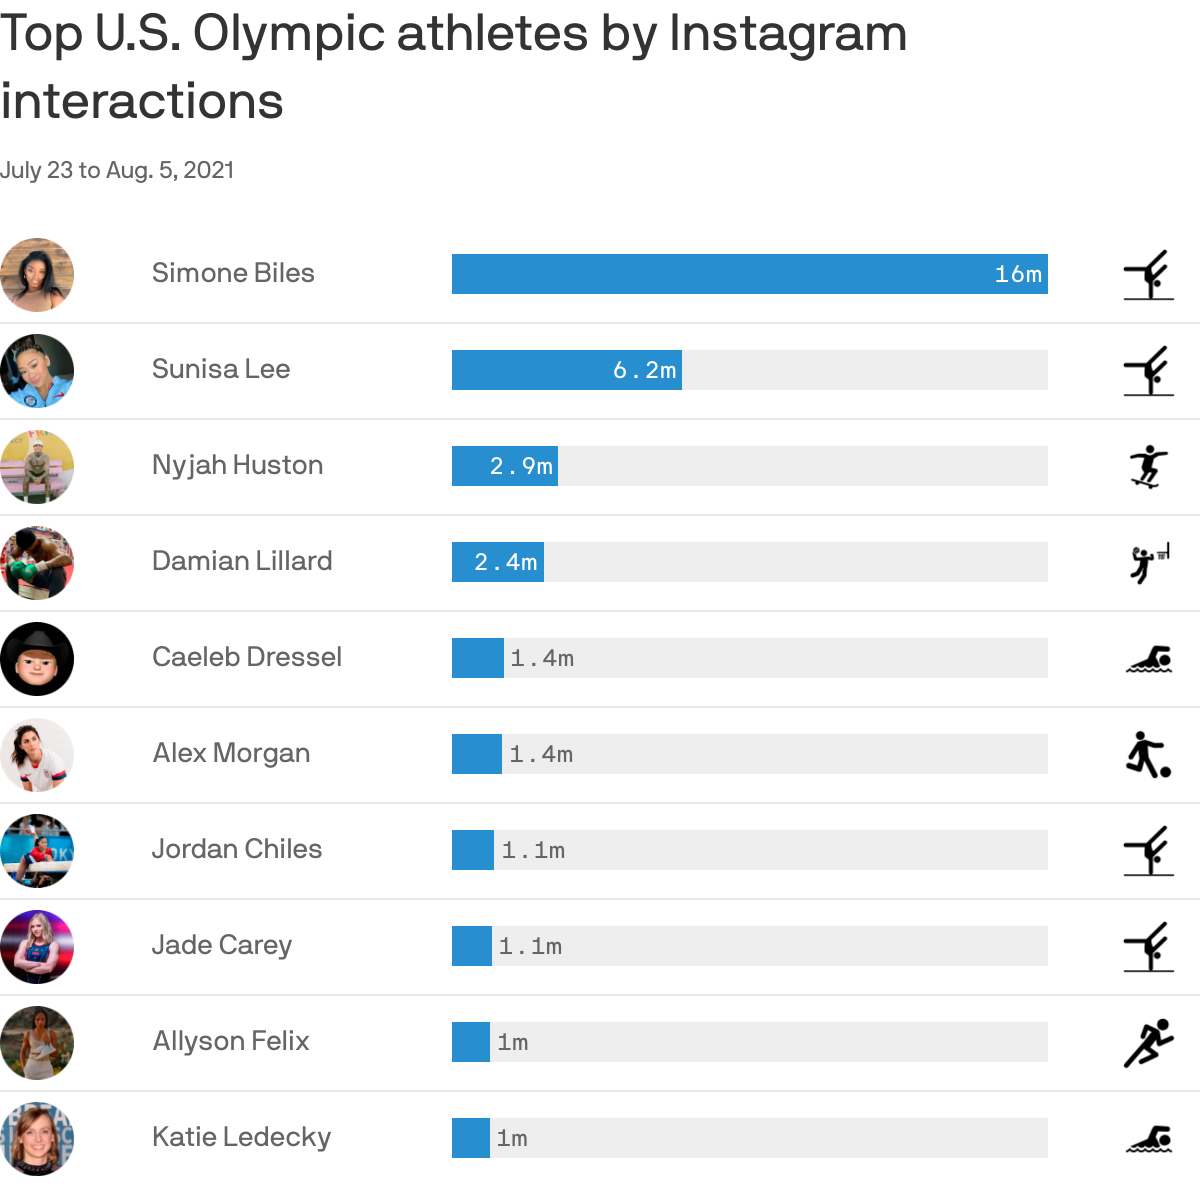 Top U.S. Olympic athletes by Instagram interactions